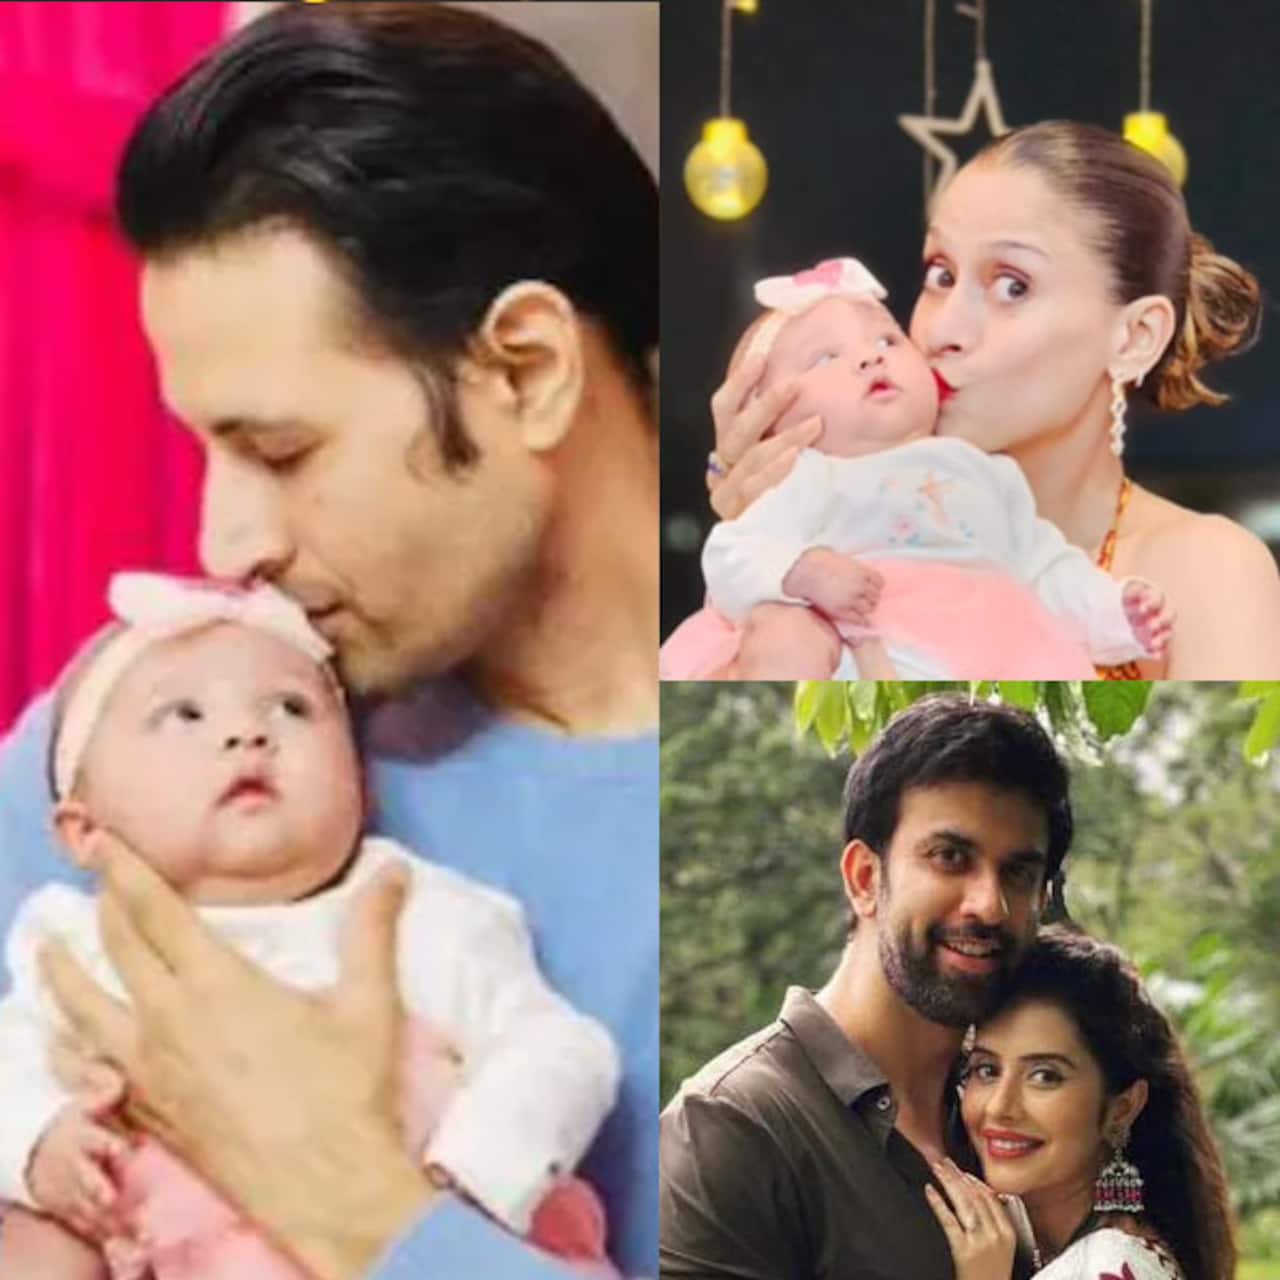 Trending TV News Today: Anupamaa actor Apurva Agnihotri blessed with a baby girl; Charu Asopa reacts to estranged husband's allegations and more